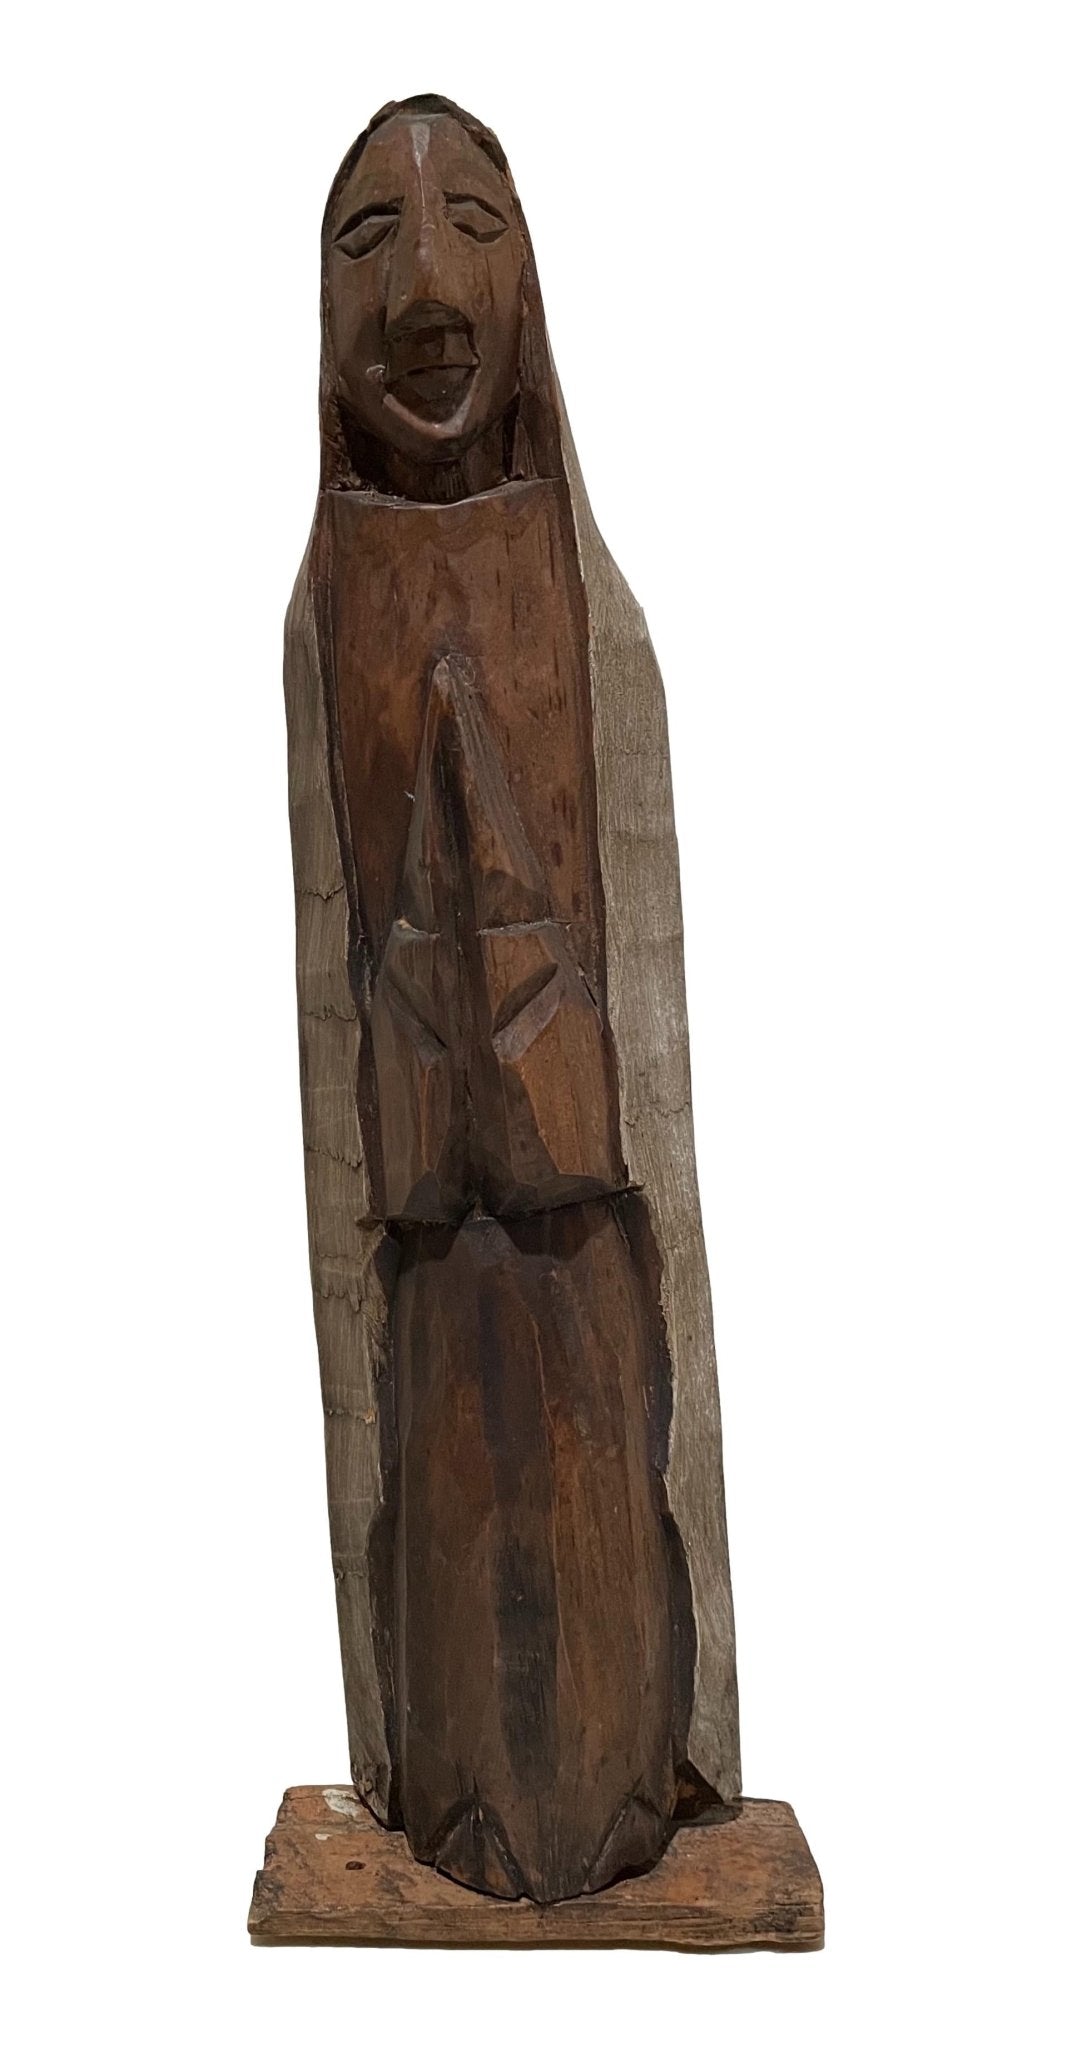 Statue of Saint Wood Piece Hand-Carved 16.5" L - Ysleta Mission Gift Shop- VOTED El Paso's Best Gift Shop